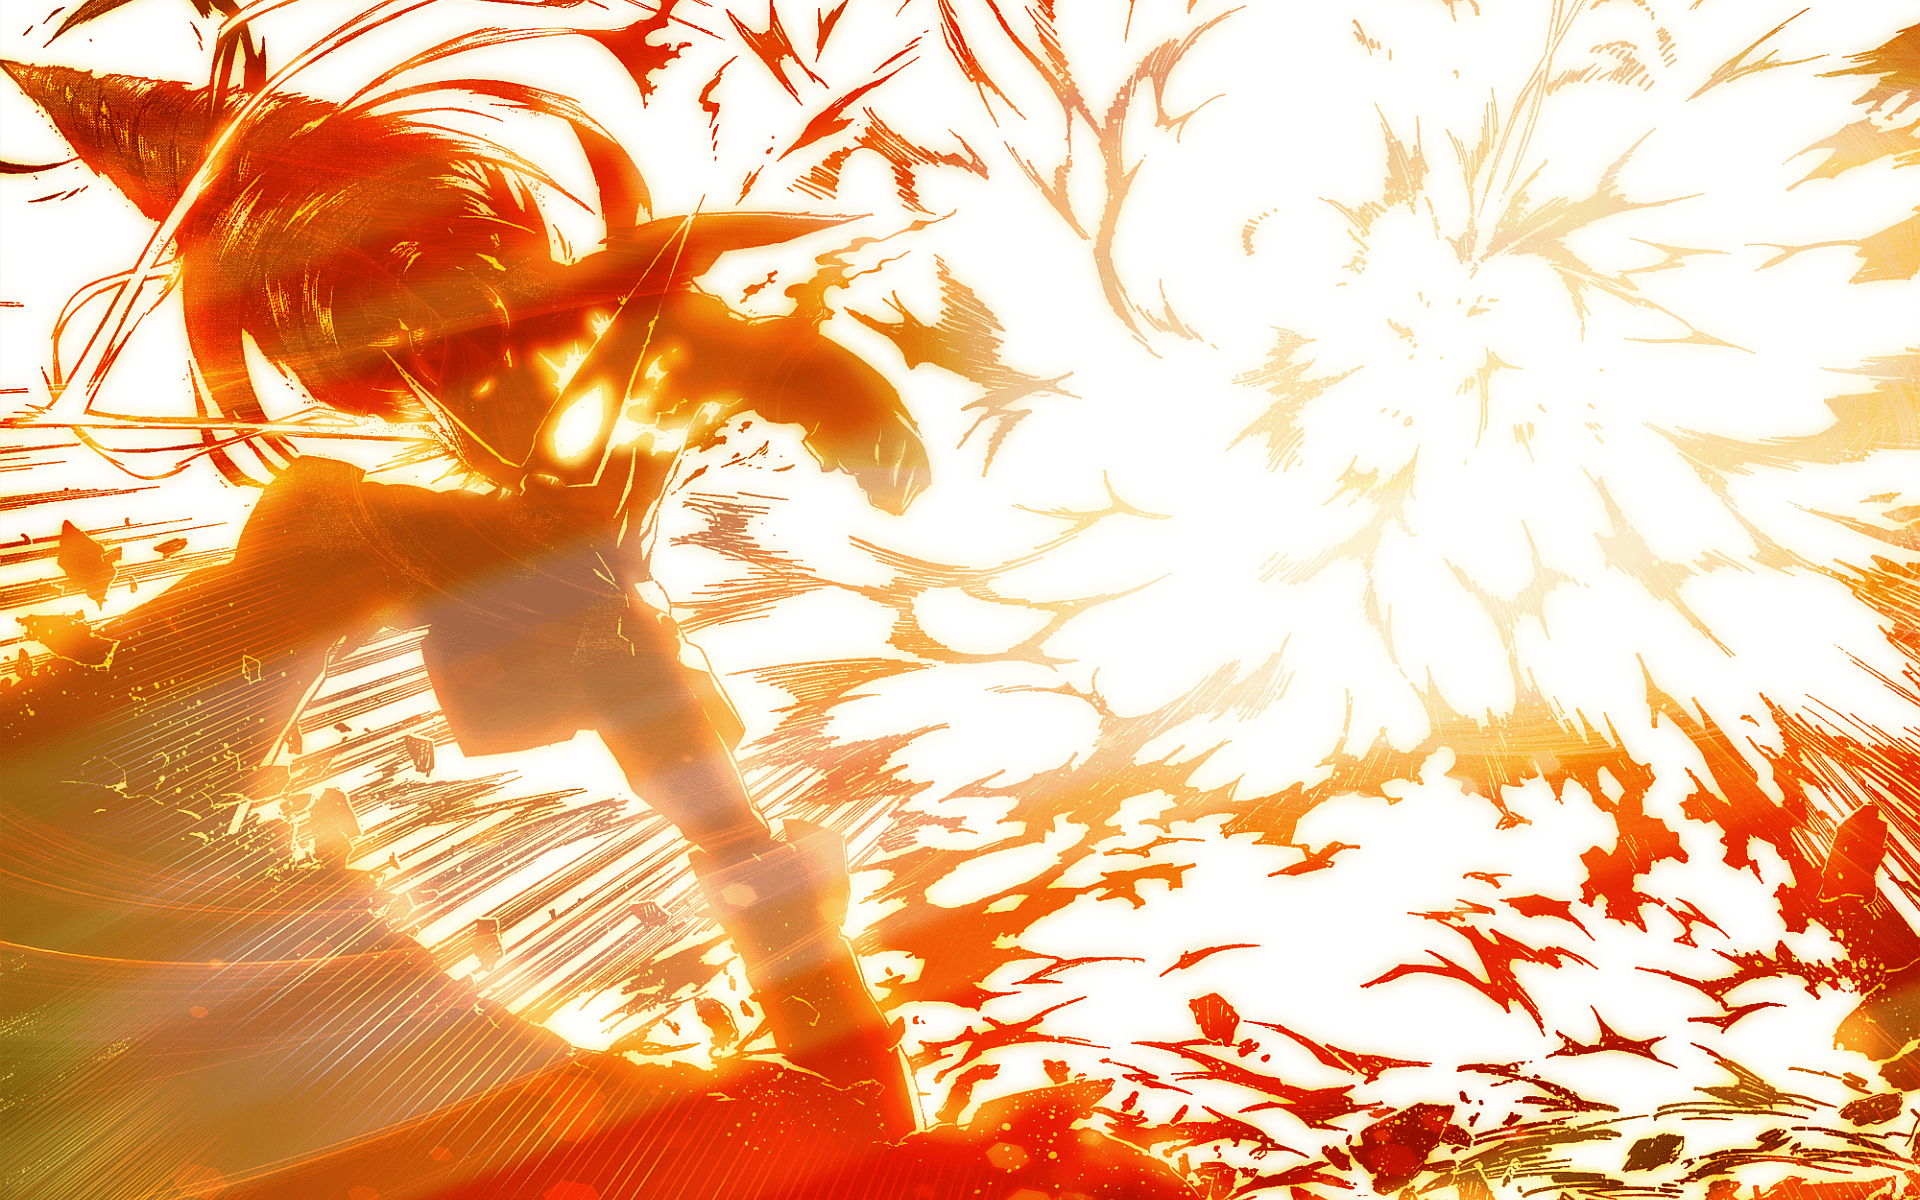 Anime Explosion Wallpapers - Top Free Anime Explosion Backgrounds